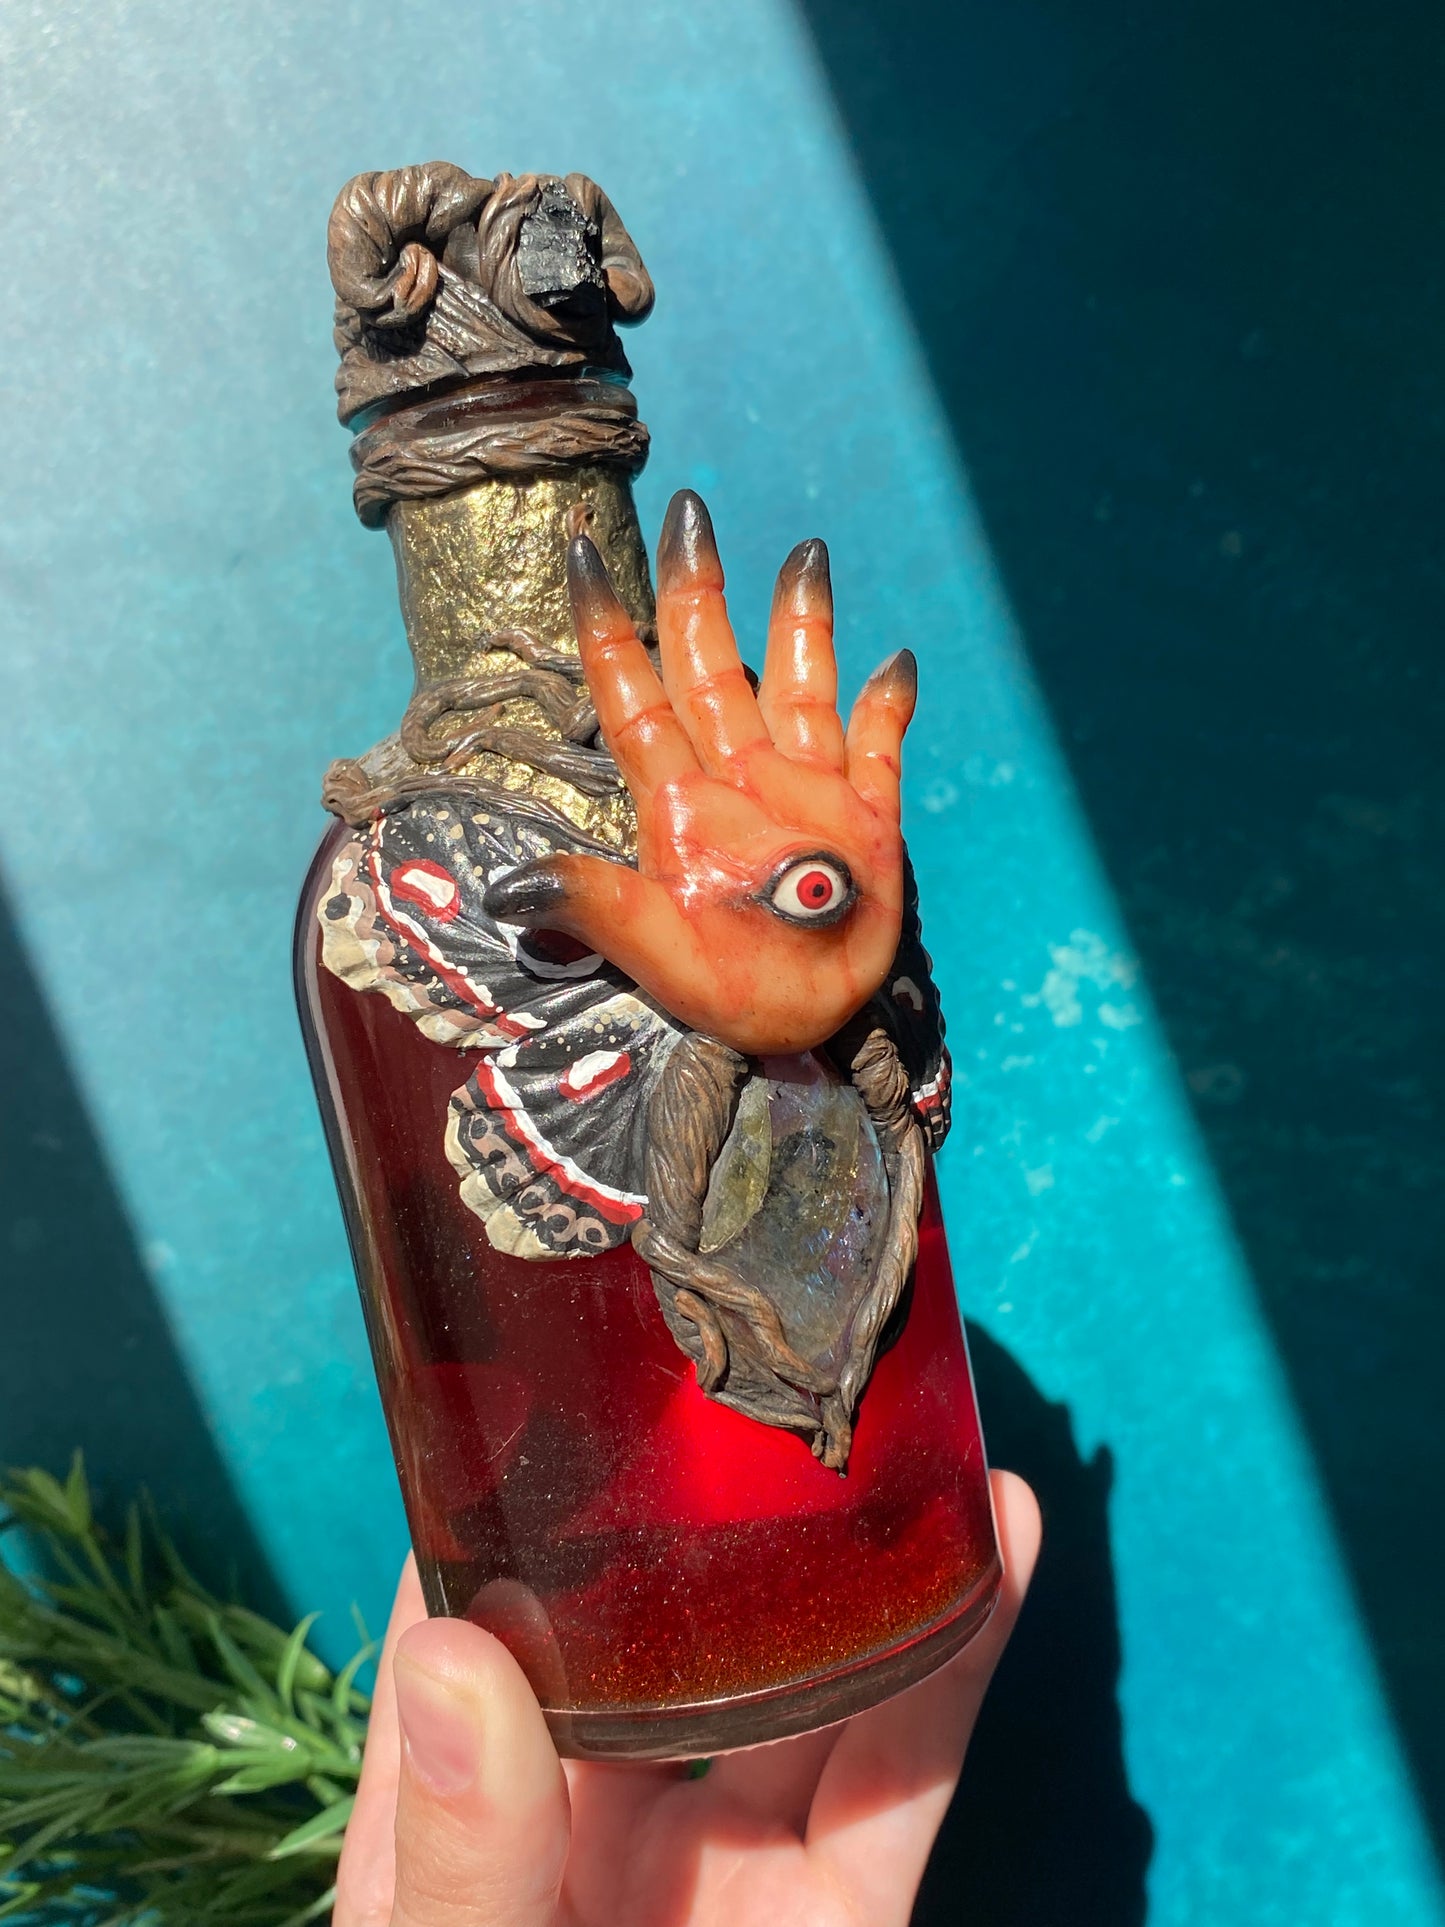 Pans Labyrinth inspired hand sculpted Pale Man potion bottle